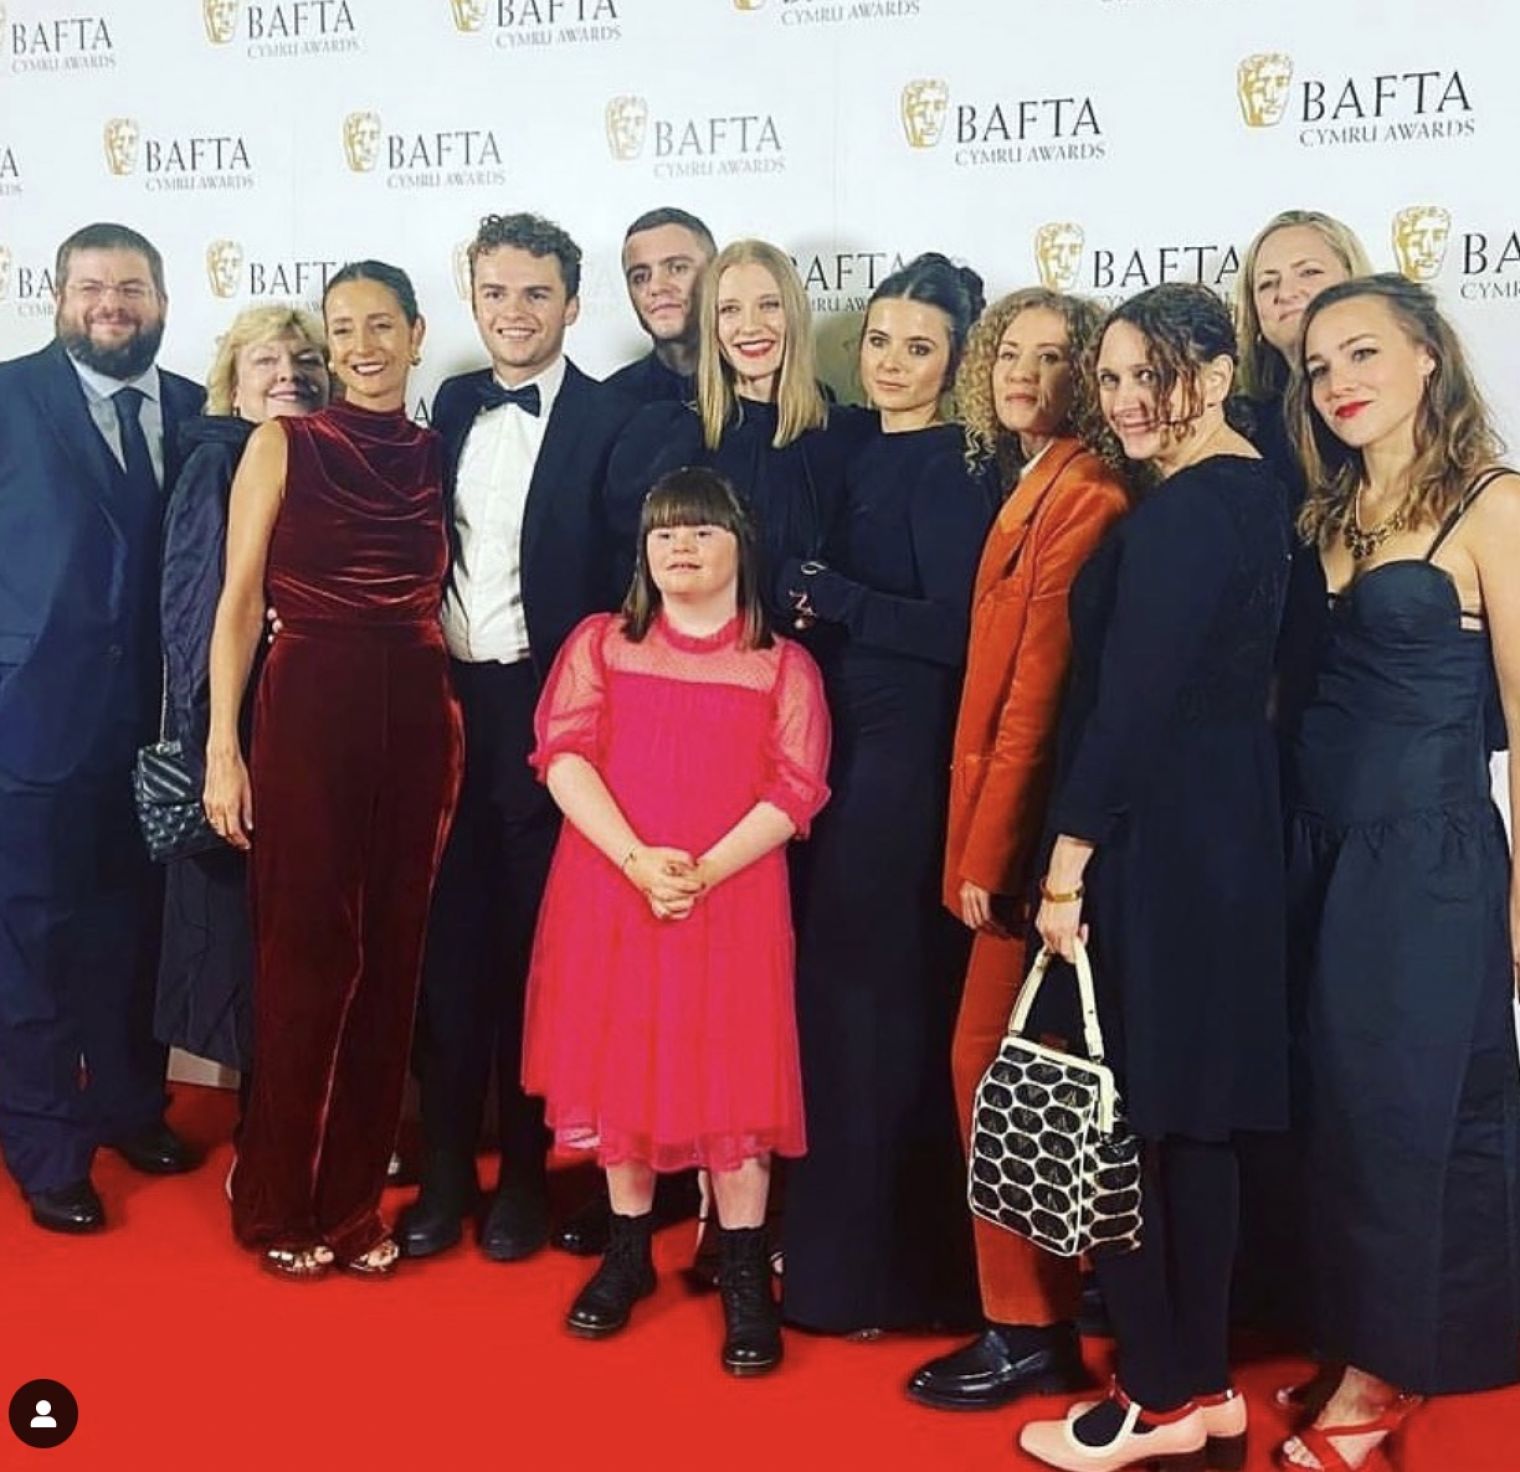 An incredible week for Laura Checkley as 'In My Skin' wins 3 BAFTA Cymru Awards and 'Screw' is nominated for a BAFTA Scotland Award